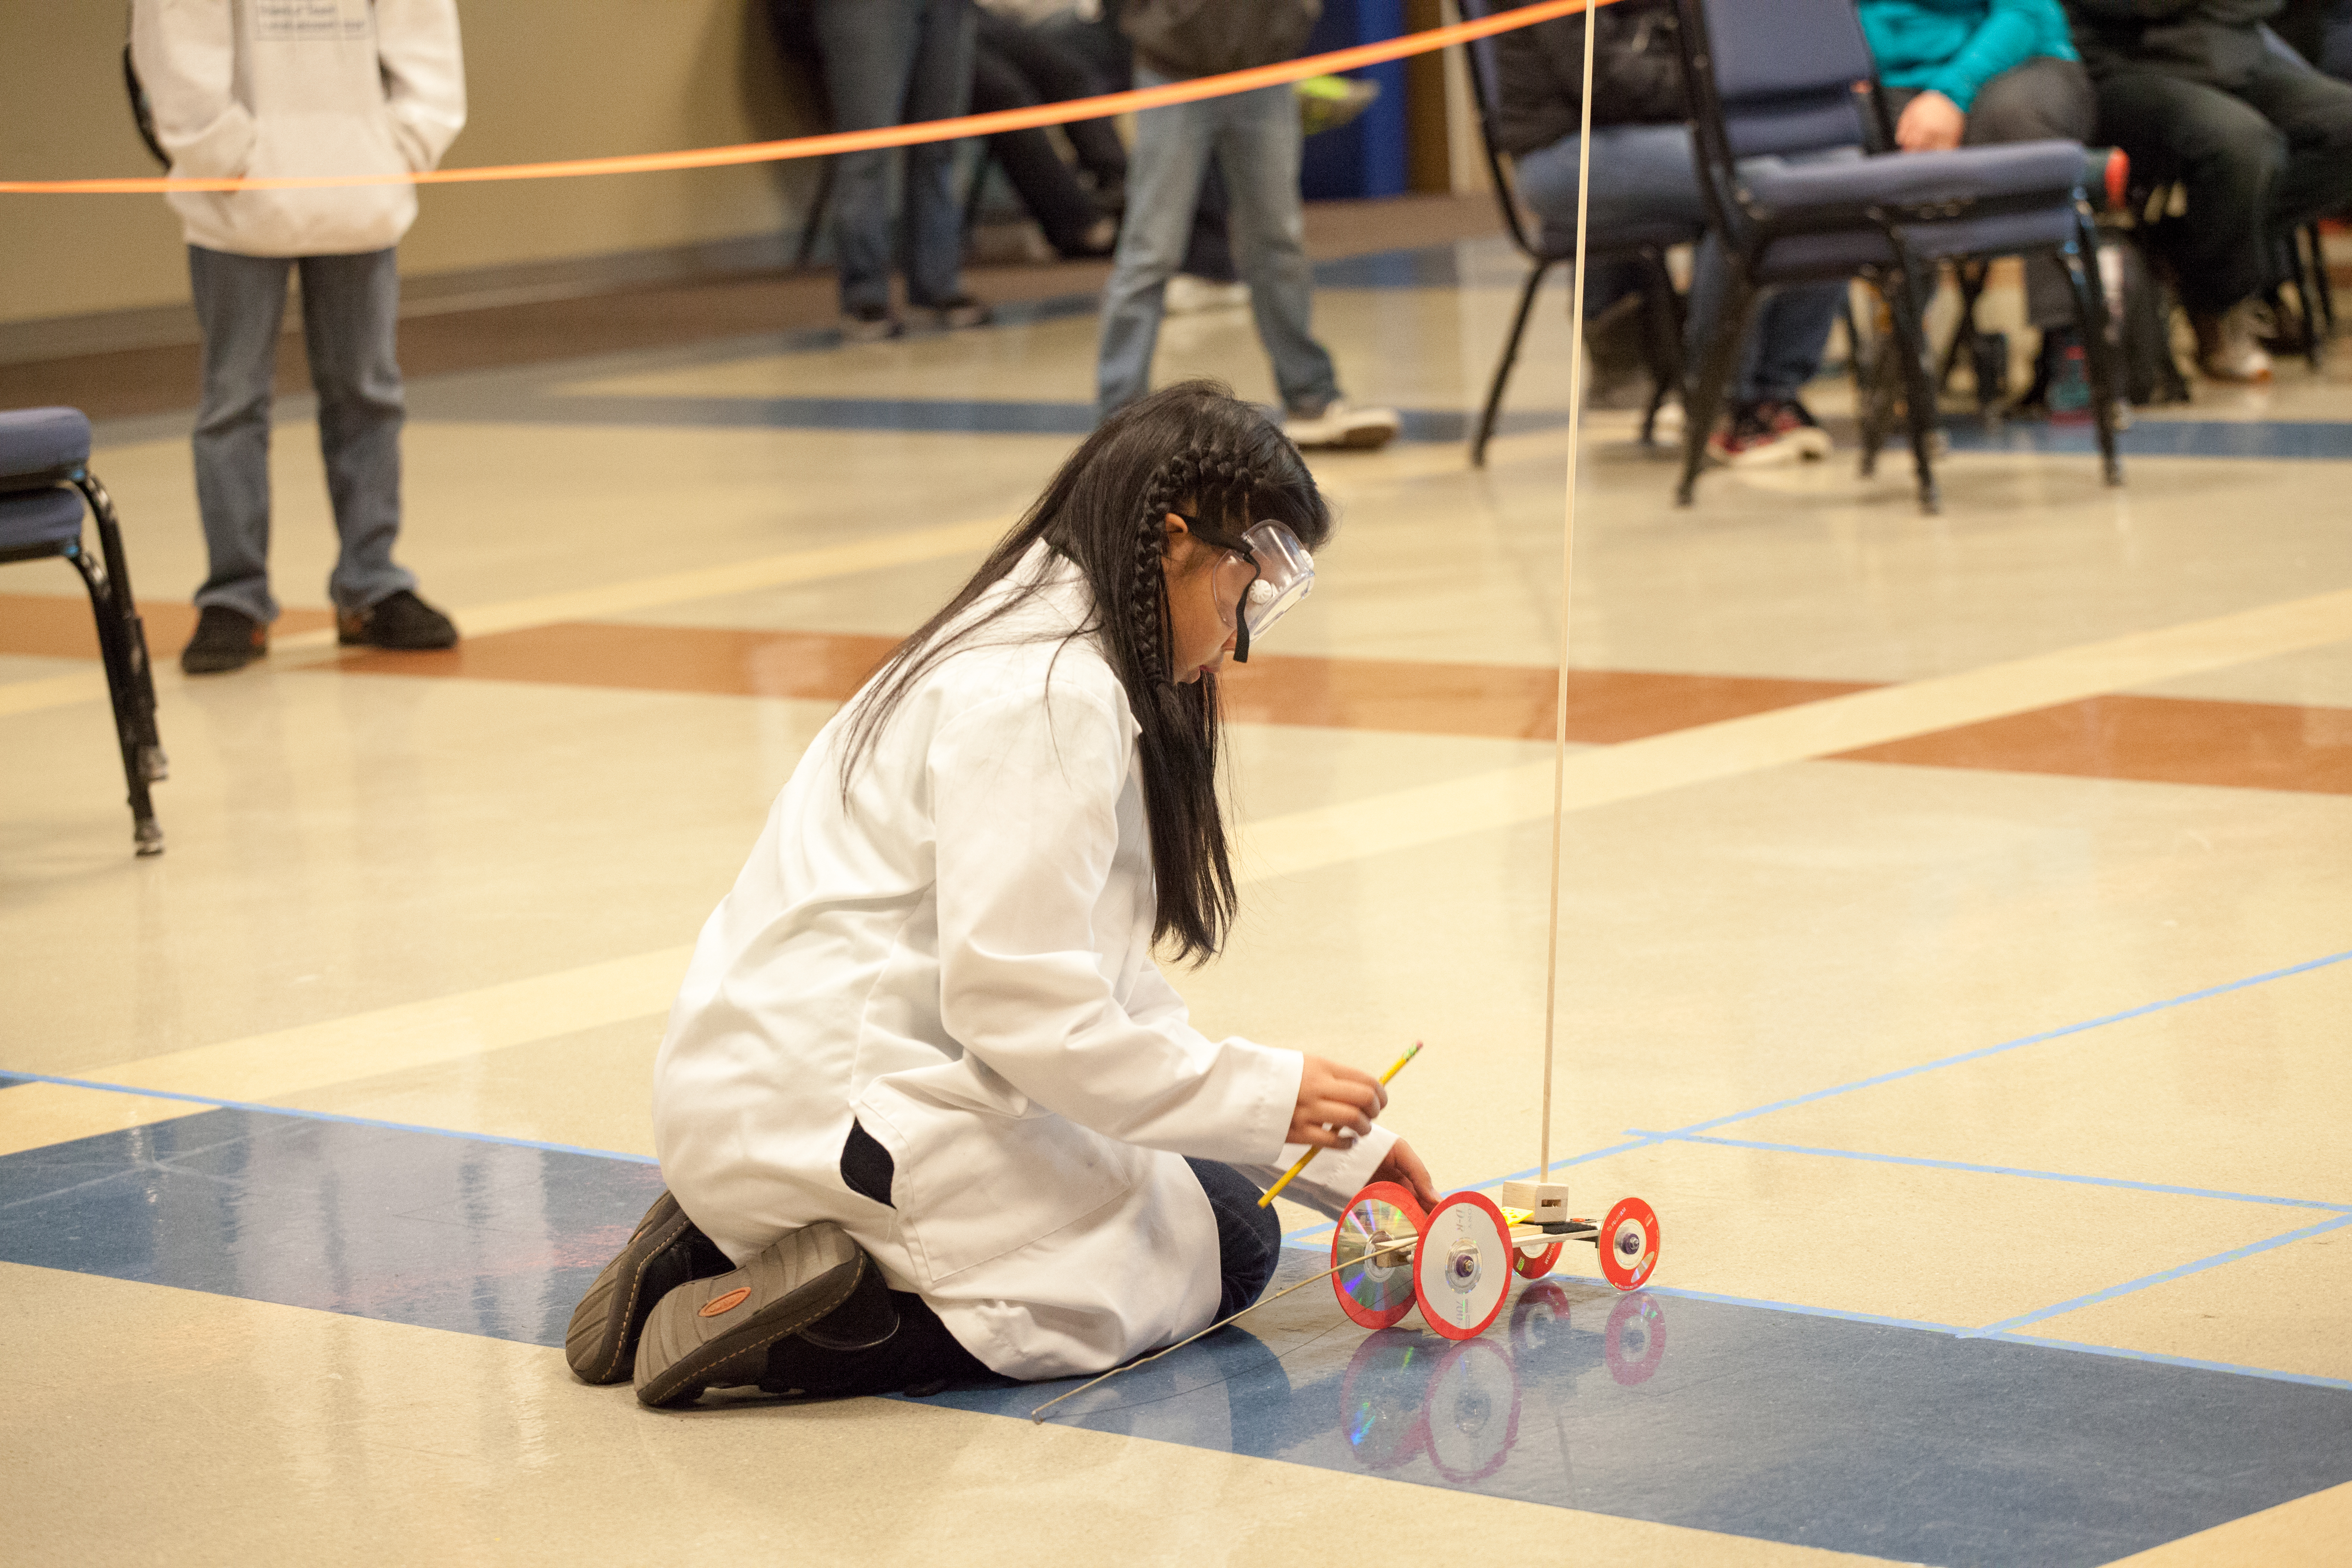 Young woman in white lab coat crouched down with small robotic vehicle.